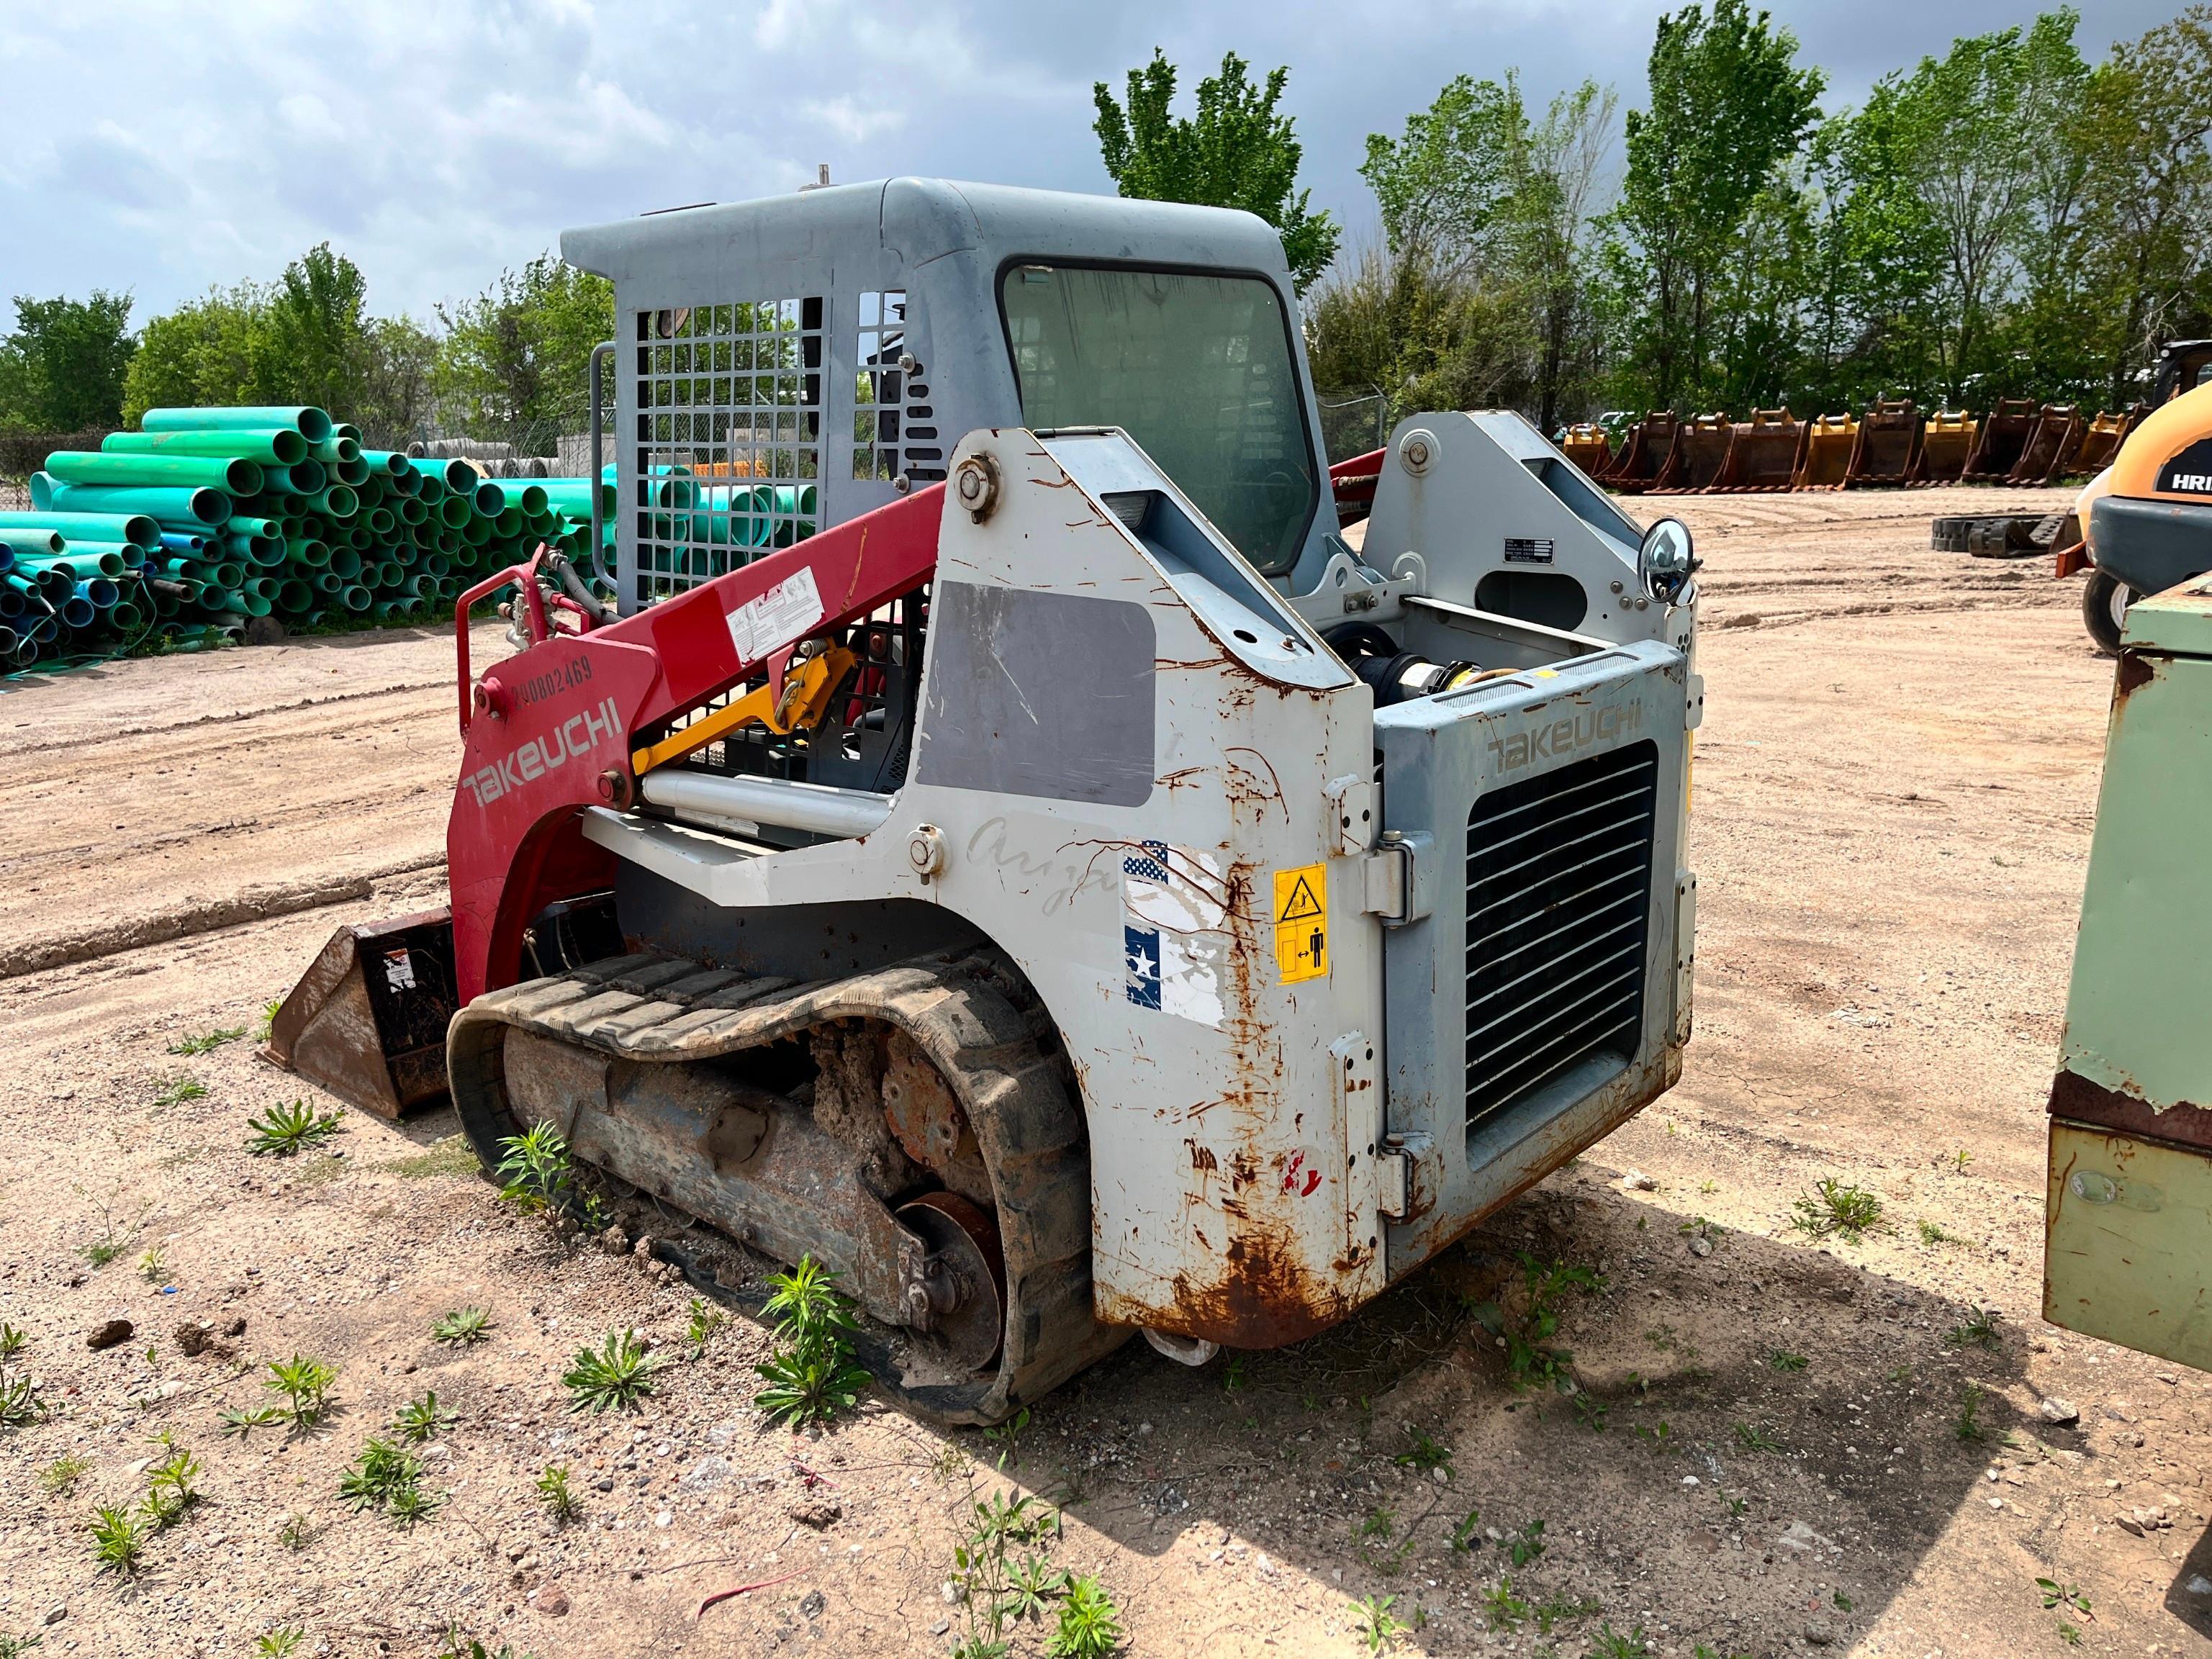 TAKEUCHI TL8 RUBBER TRACKED SKID STEER SN:200802469 powered by diesel engine, equipped with